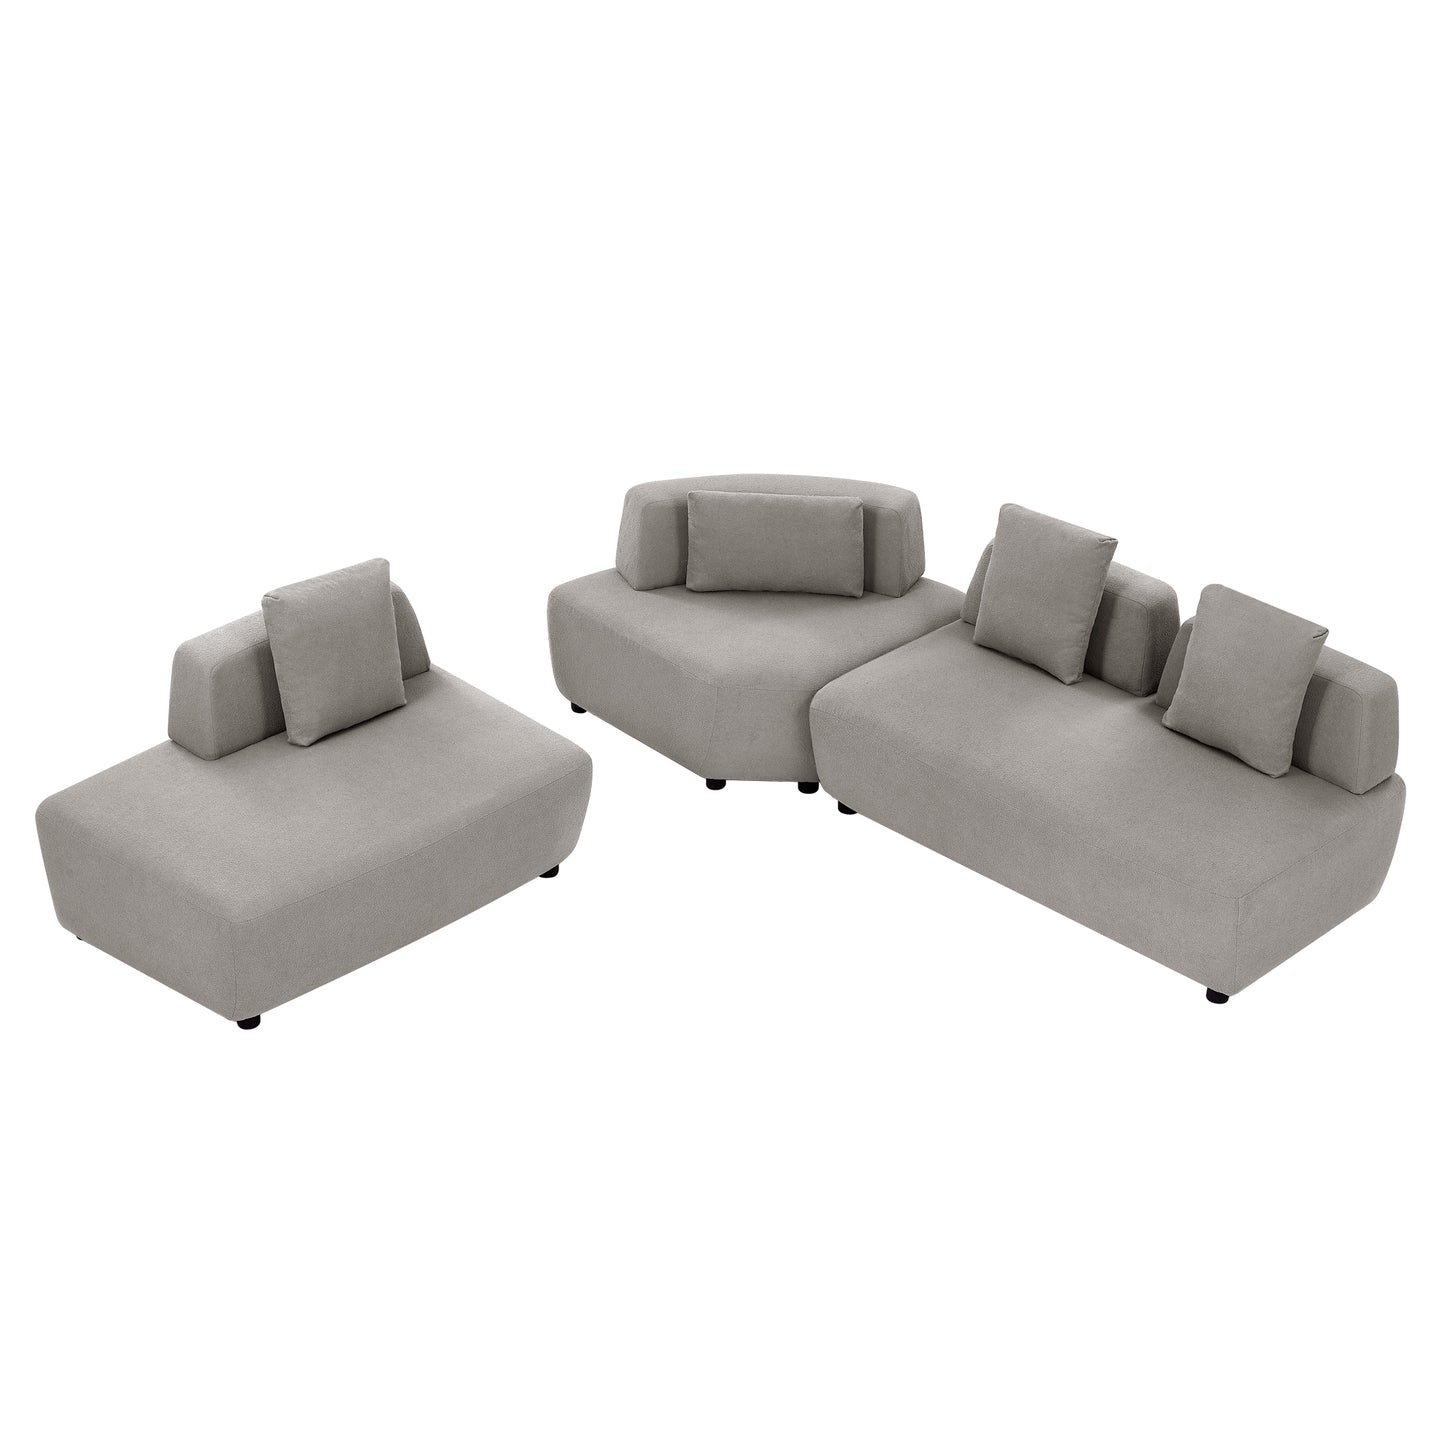 Contemporary 3-piece Sectional Sofa Free Convertible sofa with Four Removable Pillows for Living Room, Grey